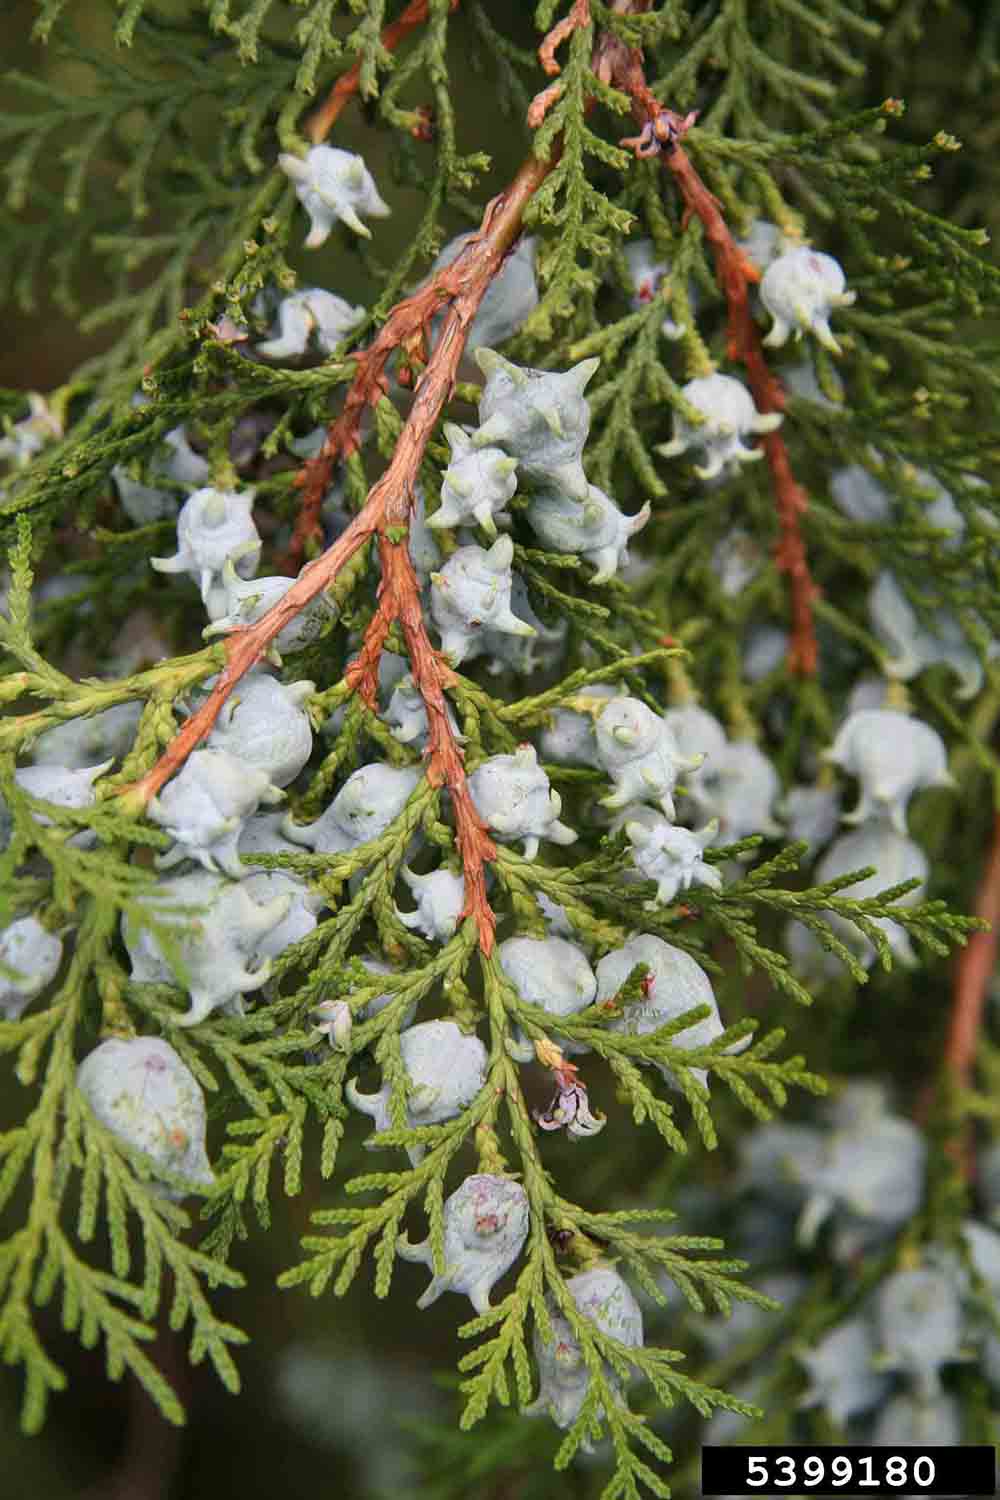 Oriental arborvitae cones and foliage, showing overlapping scales on foliage